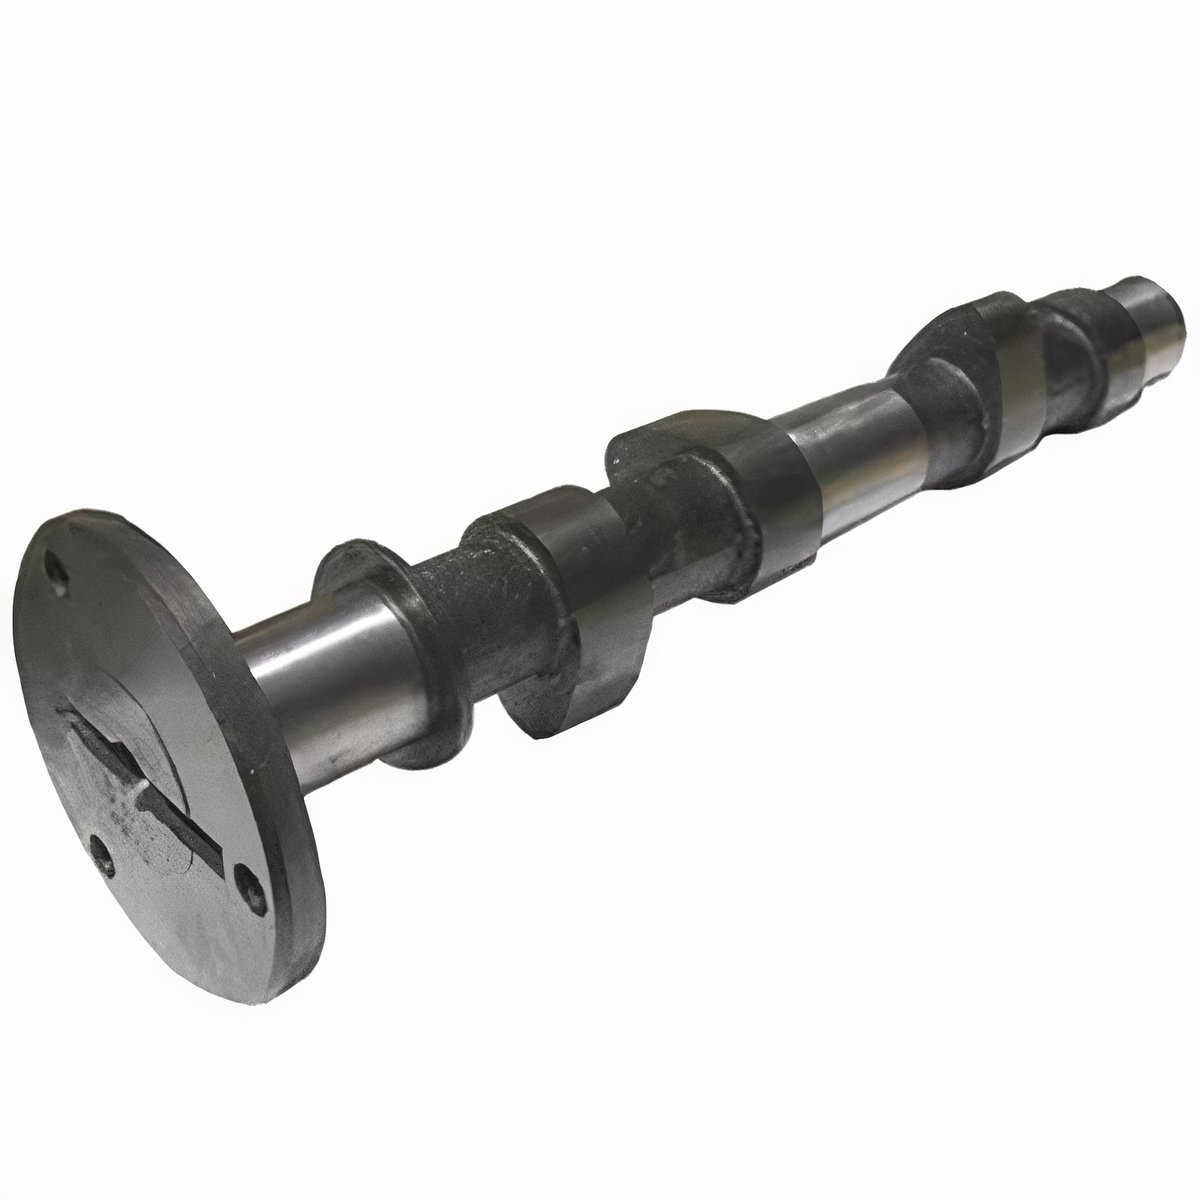 Engle W-110 - VW Performance Camshaft - For 1.1 or 1.25 Rockers